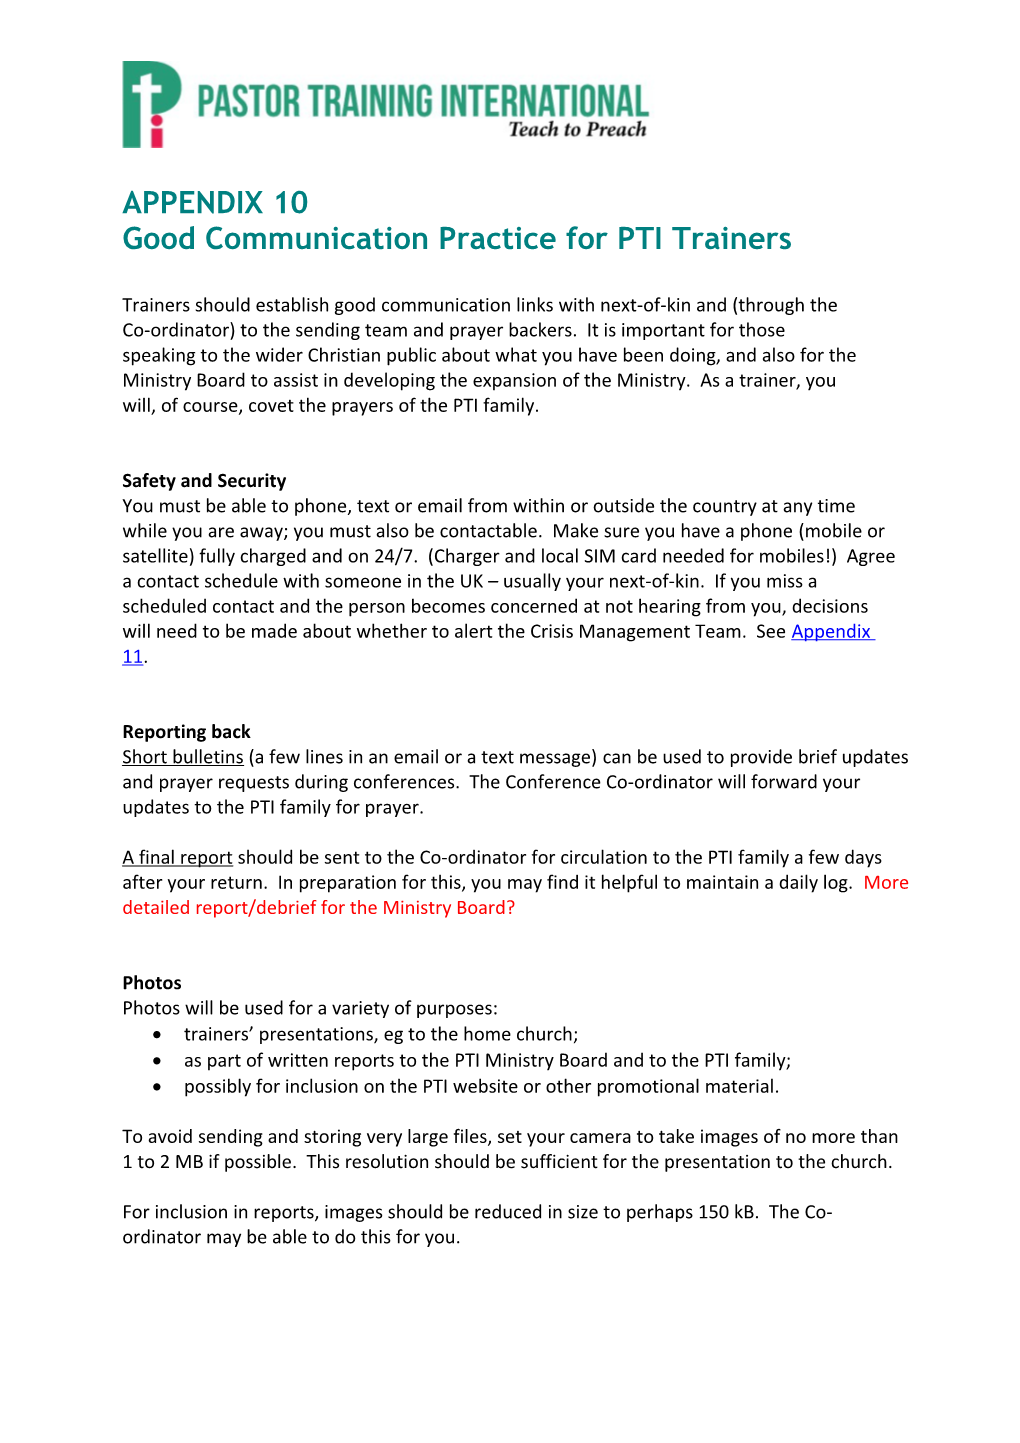 Good Communication Practice for PTI Trainers